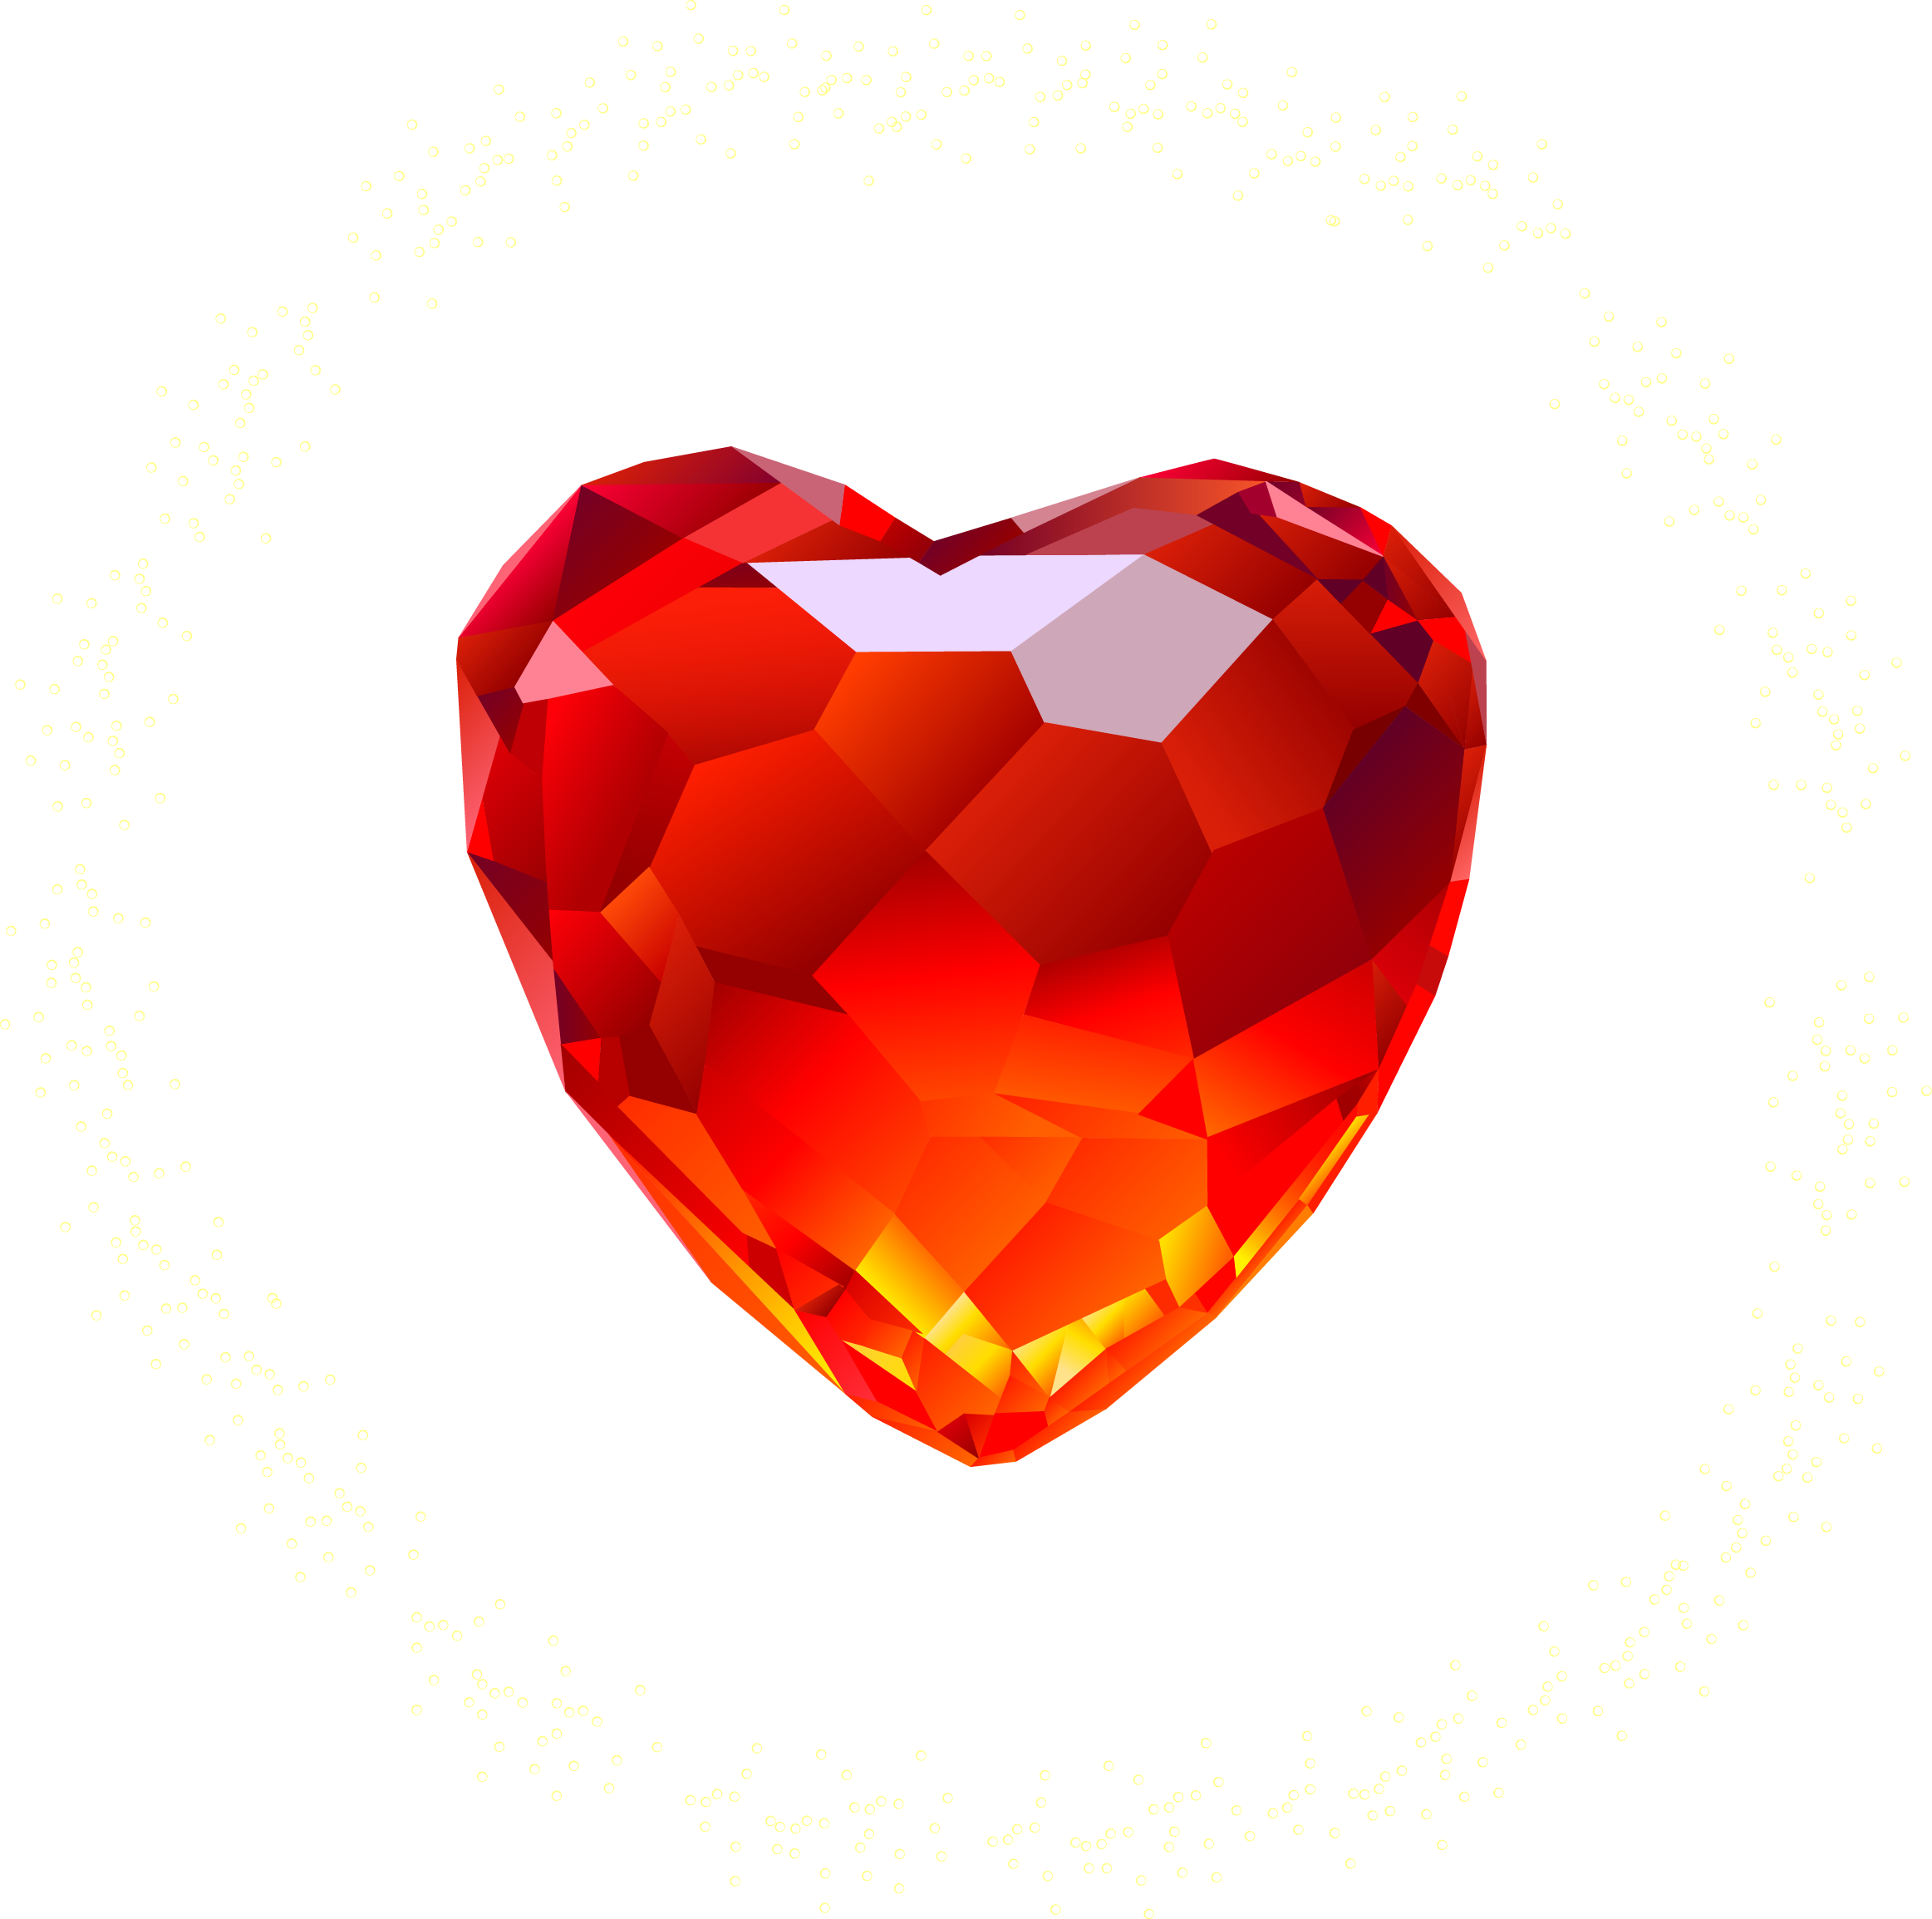 Large_Red_Diamond_Heart_Clipart.png?m=1366063200 